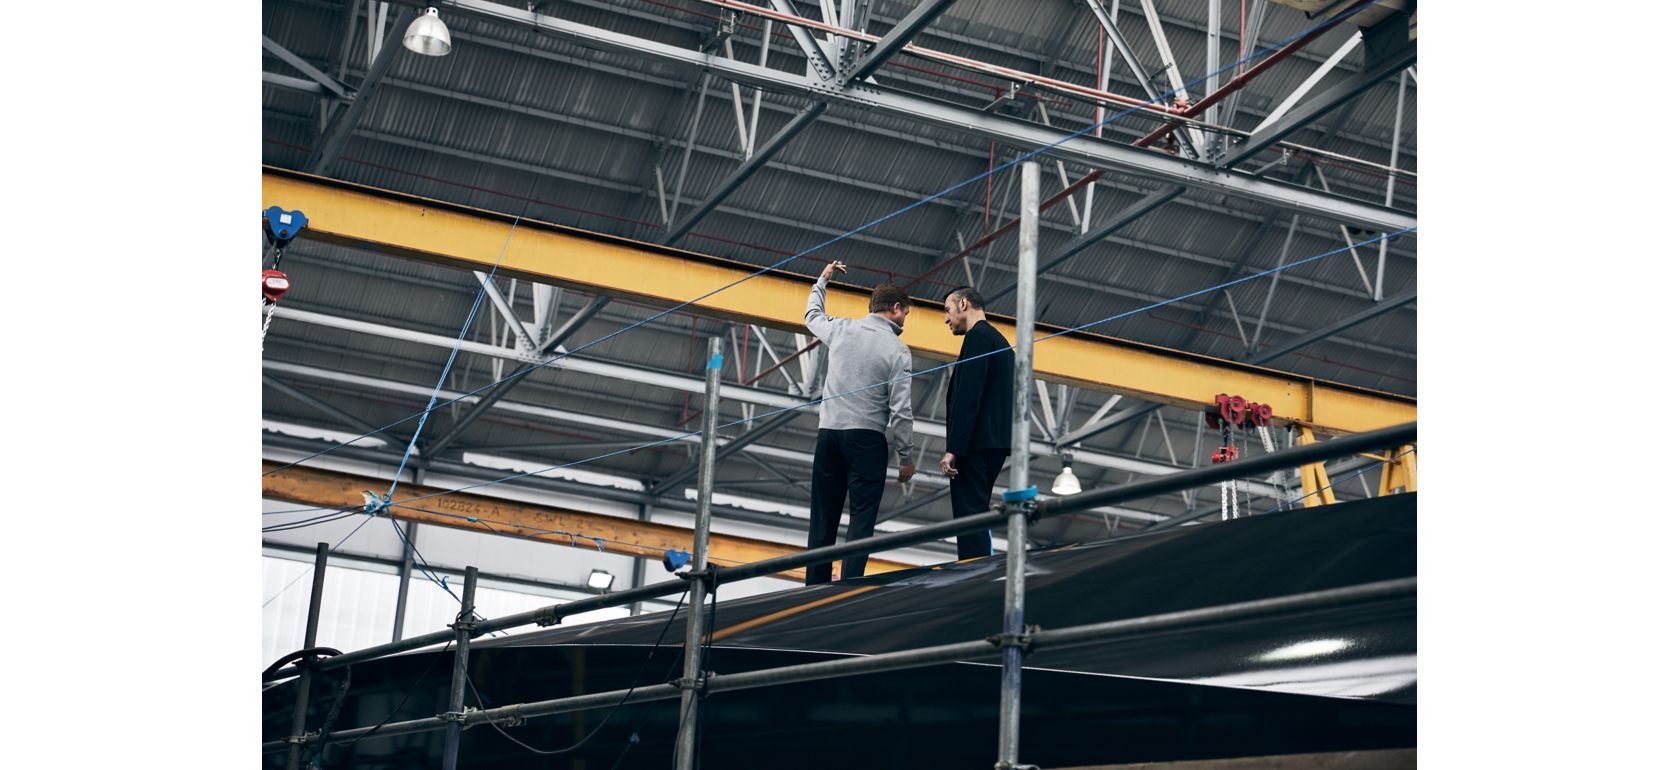 Behind-the-scenes images of HUGO BOSS boat construction